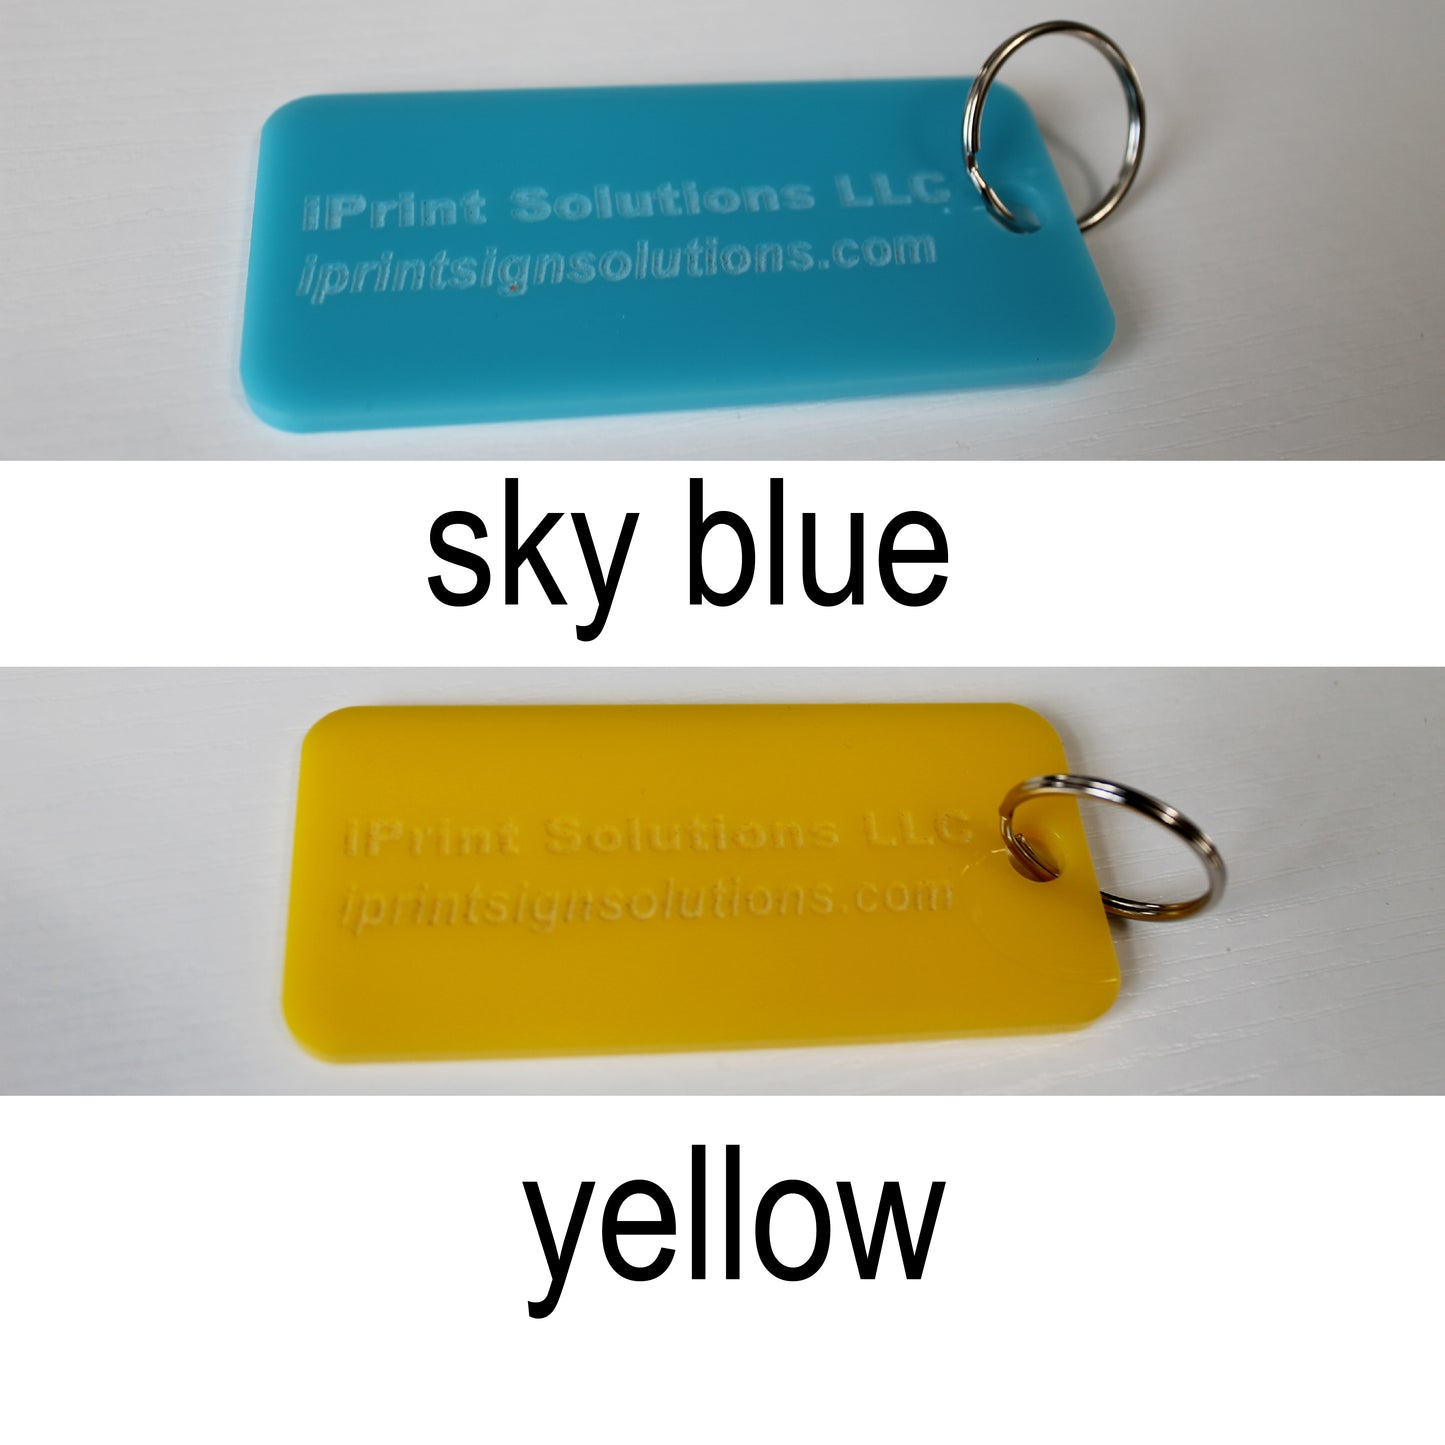 Custom keychain gift, Custom acrylic keychains, Personalized keychains for businesses, Engraved acrylic keychains, keychains for marketing